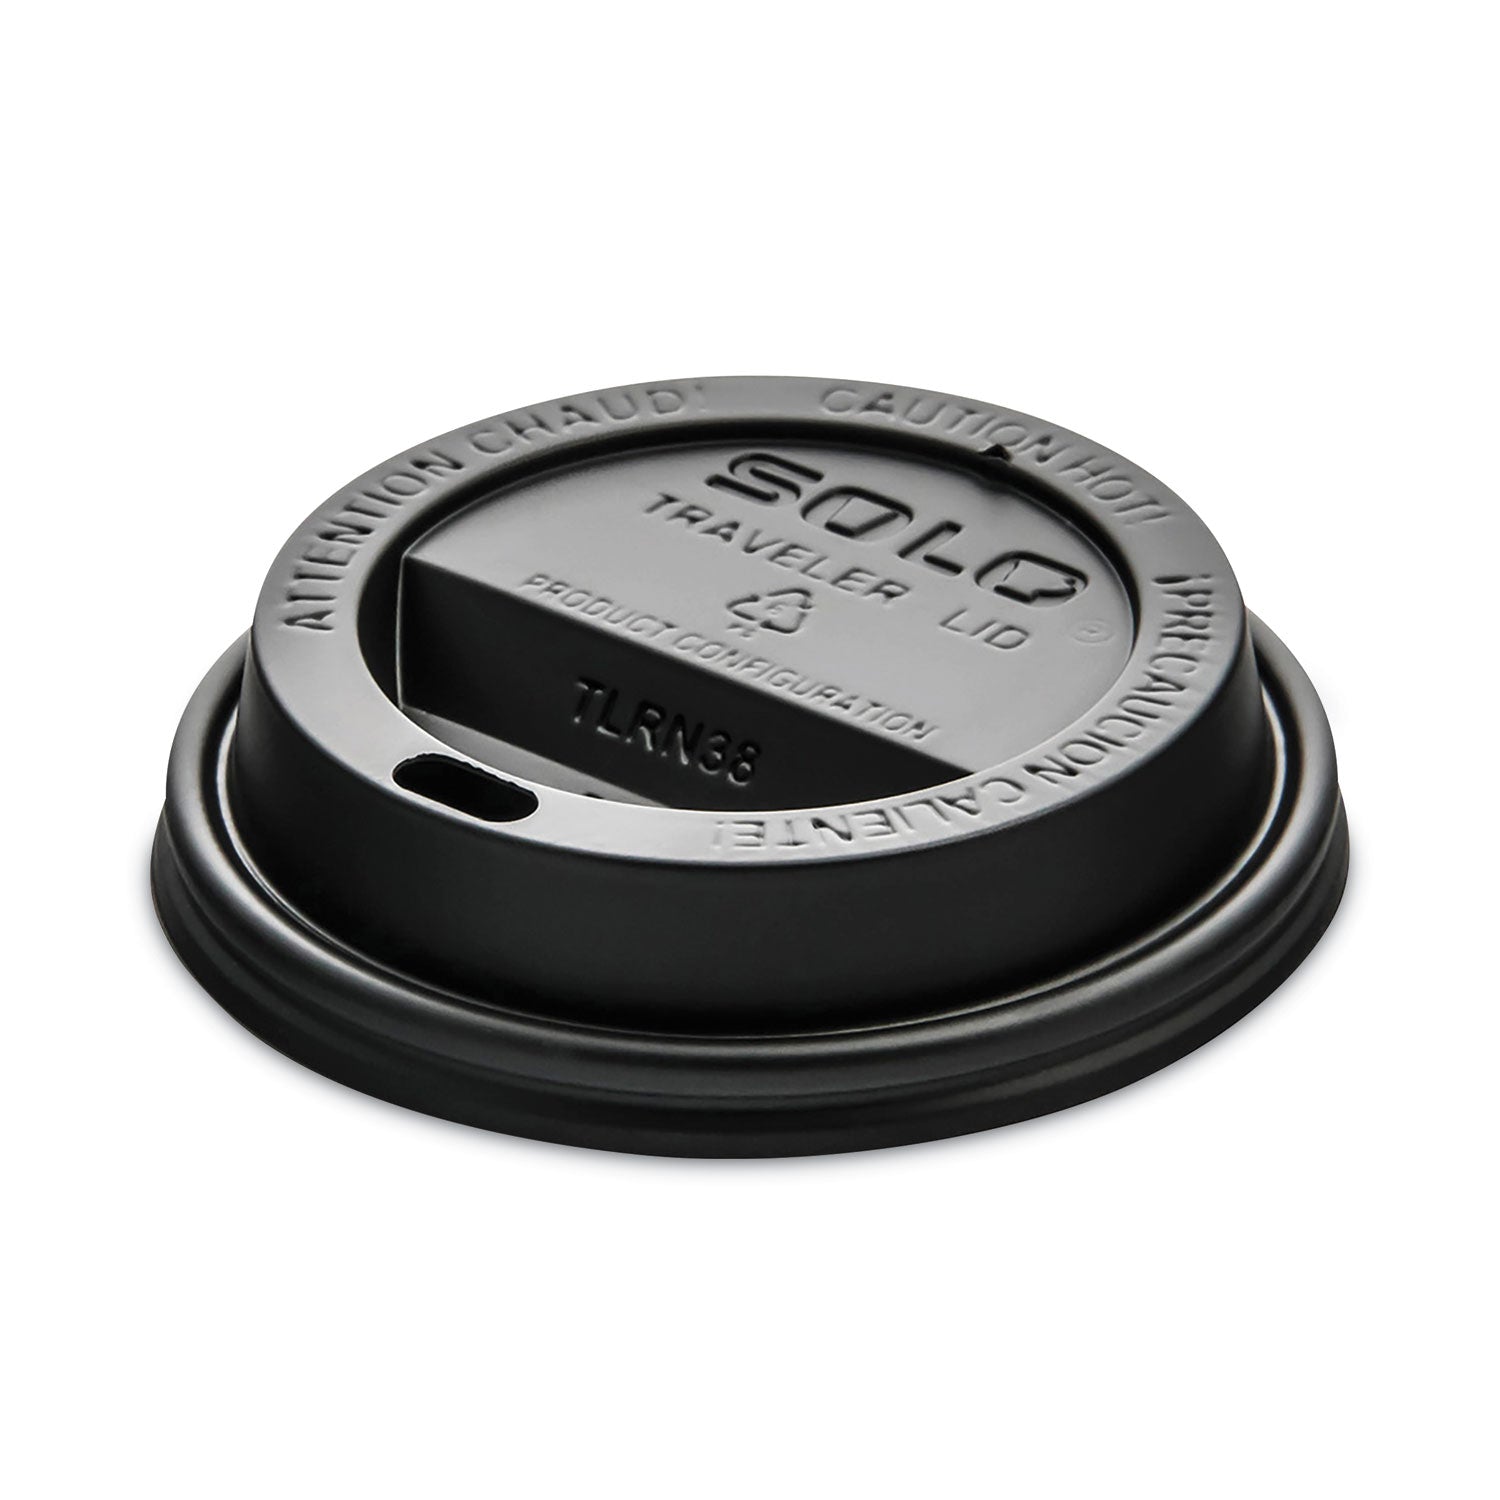 traveler-cappuccino-style-dome-lid-fits-8-oz-cups-black-1000-carton_scctl38b2 - 1